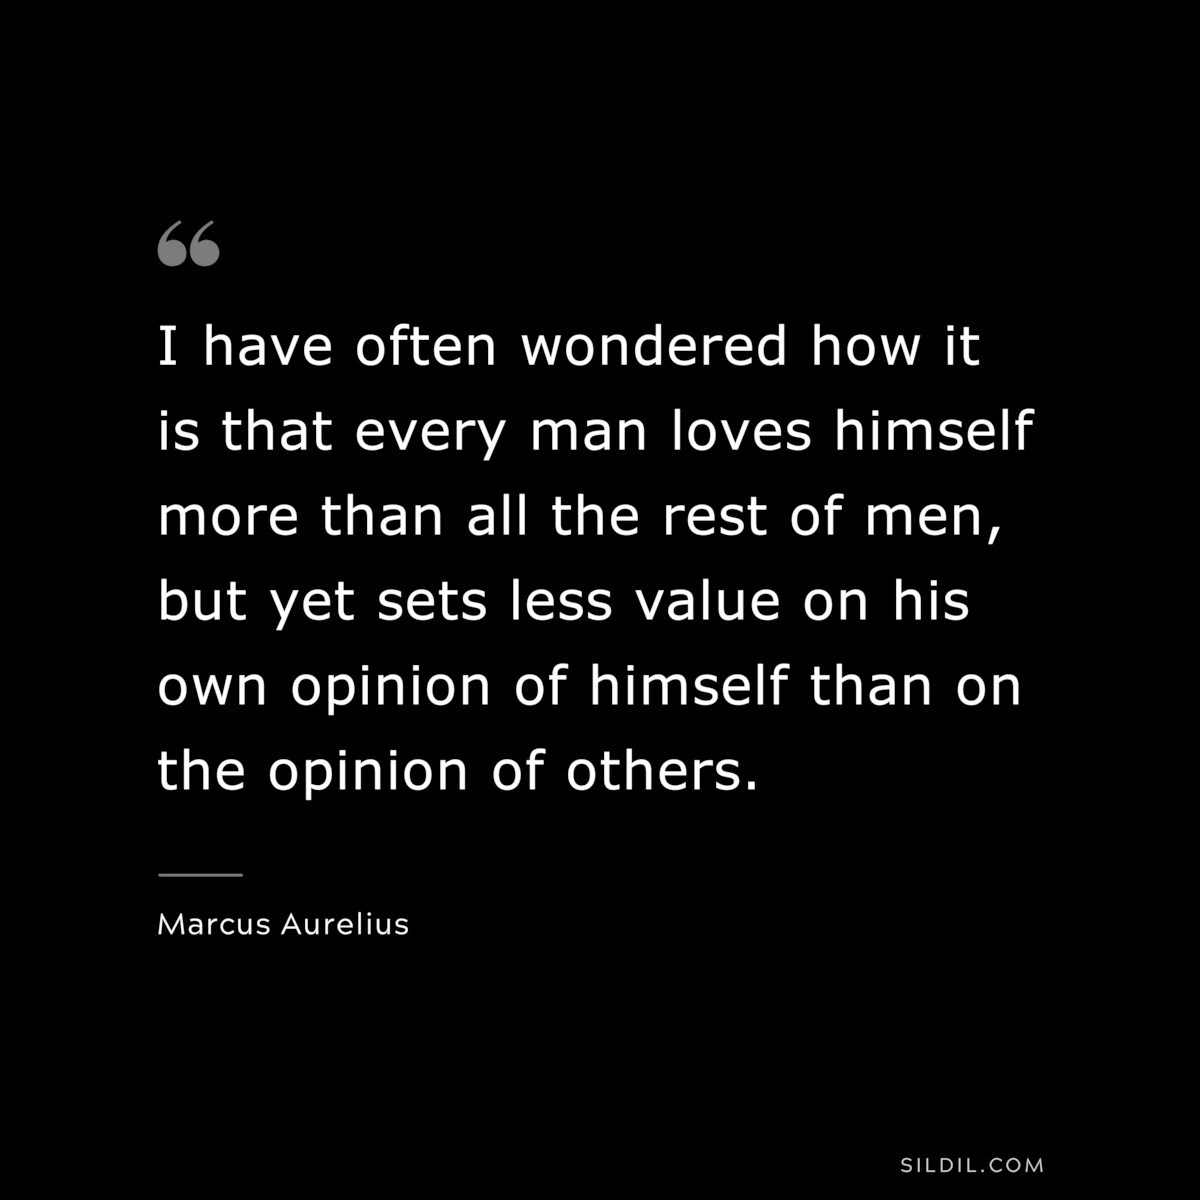 I have often wondered how it is that every man loves himself more than all the rest of men, but yet sets less value on his own opinion of himself than on the opinion of others. ― Marcus Aurelius